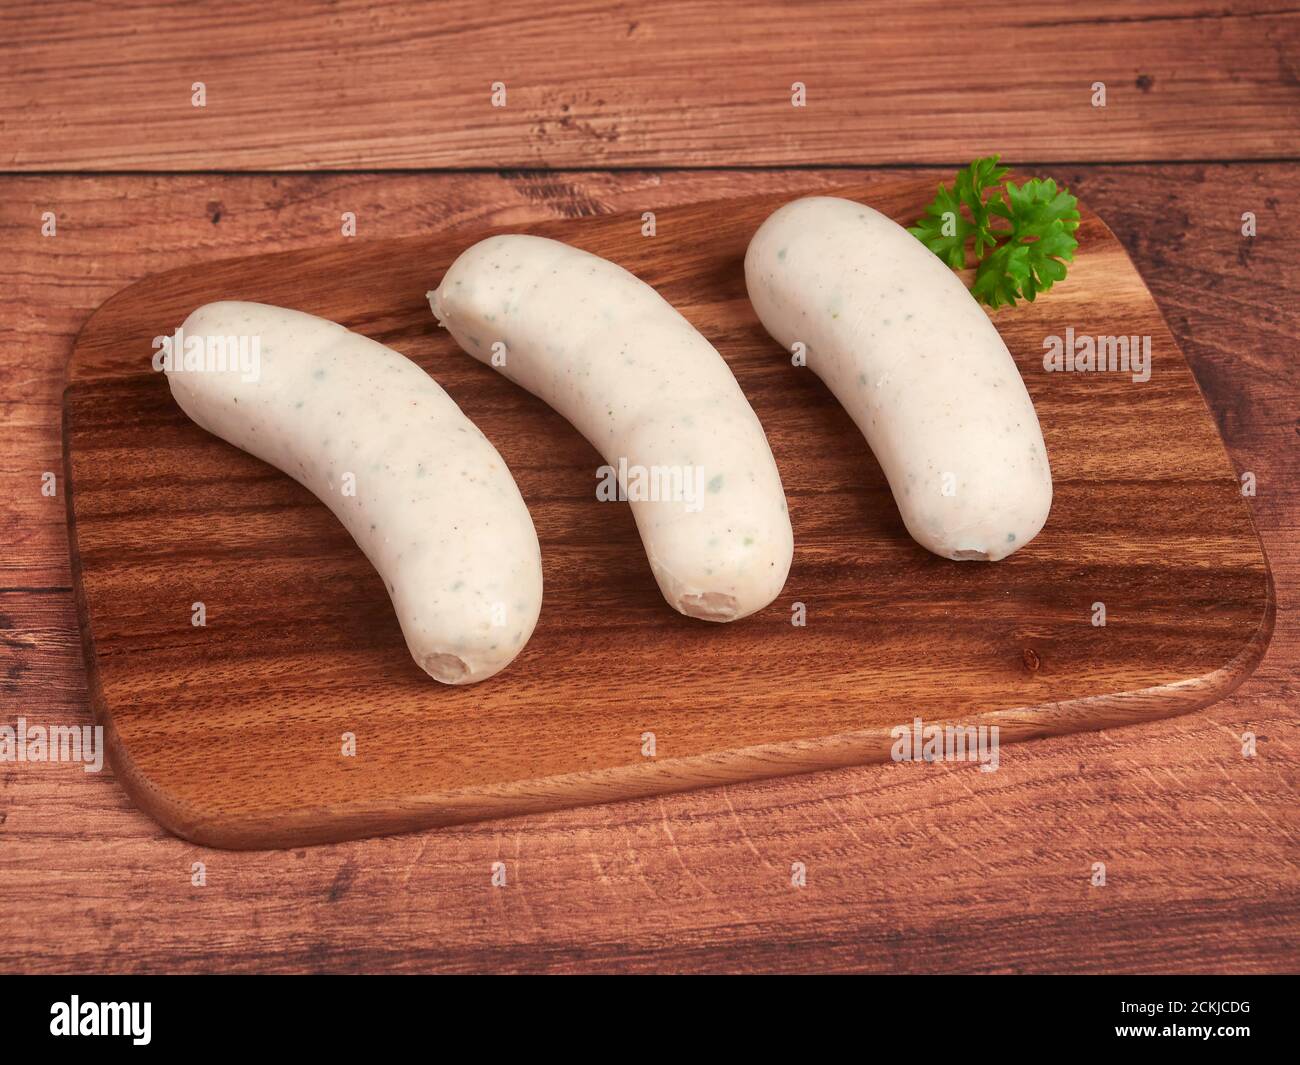 Traditional Bavarian white sausages (weisswurst) on a wooden board Stock Photo